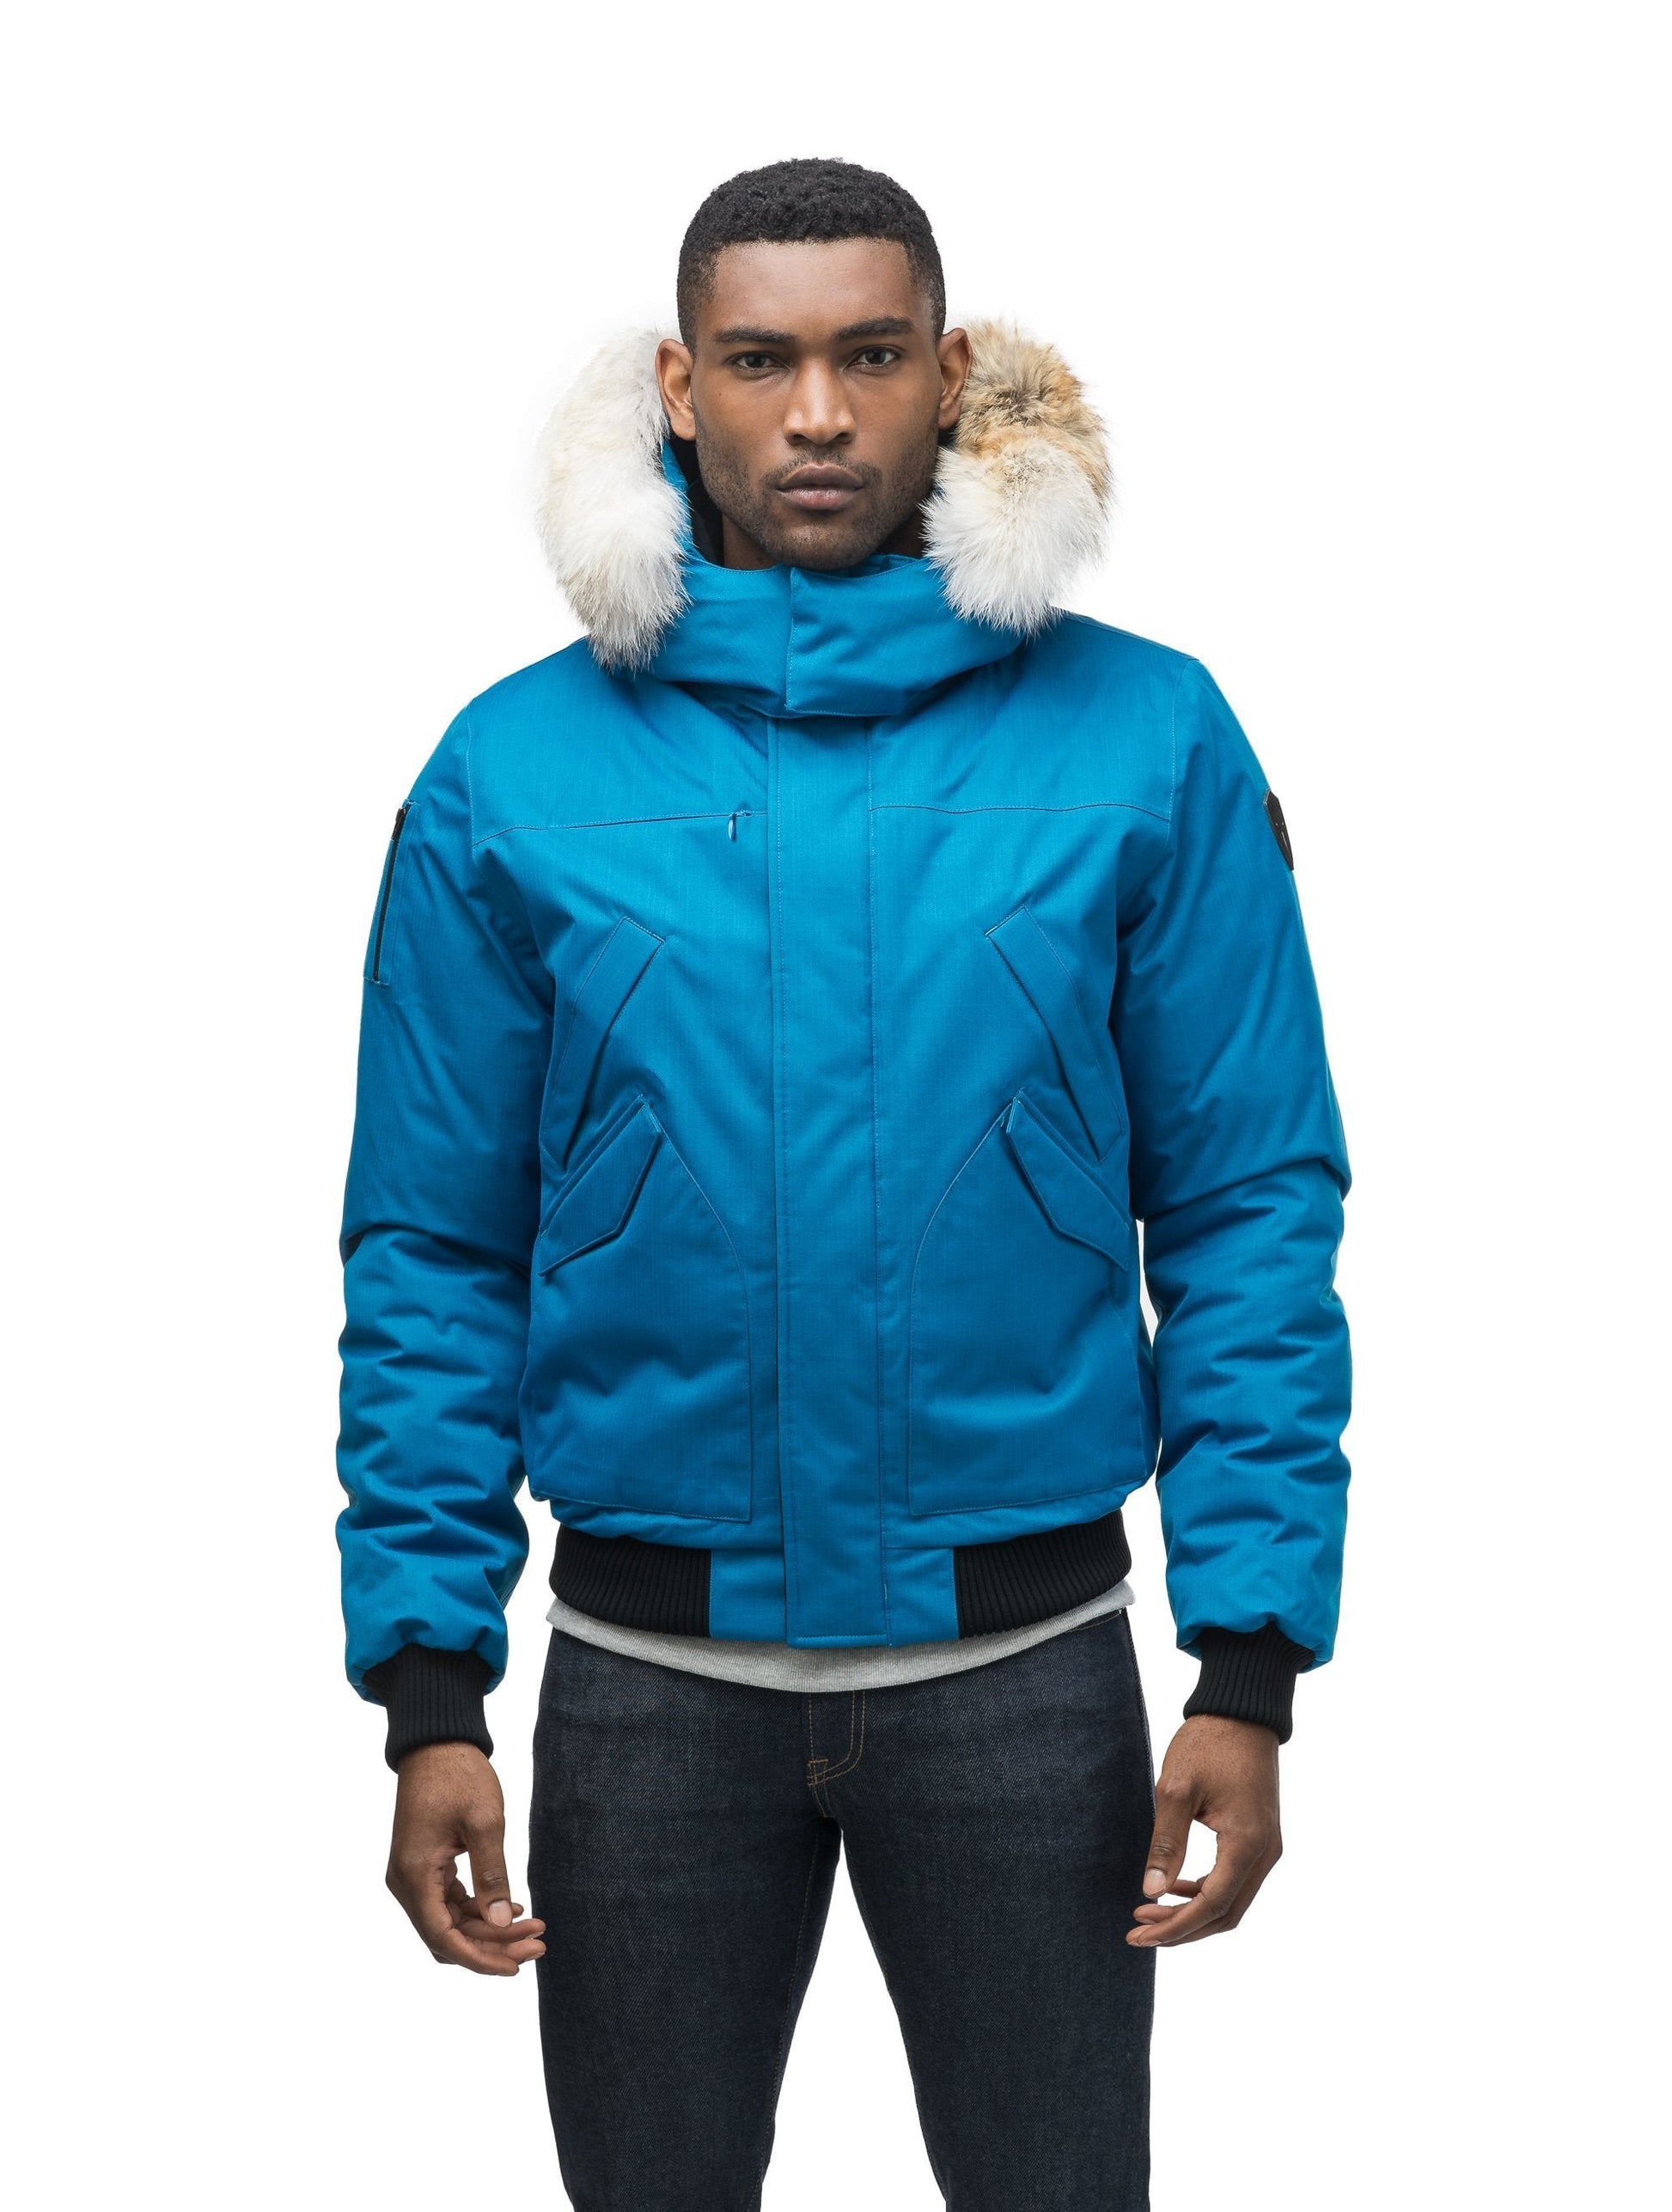 Men's classic down filled bomber jacket with a down filledÂ hood that features a removable coyote fur trim and concealed moldable framing wire in Sea Blue